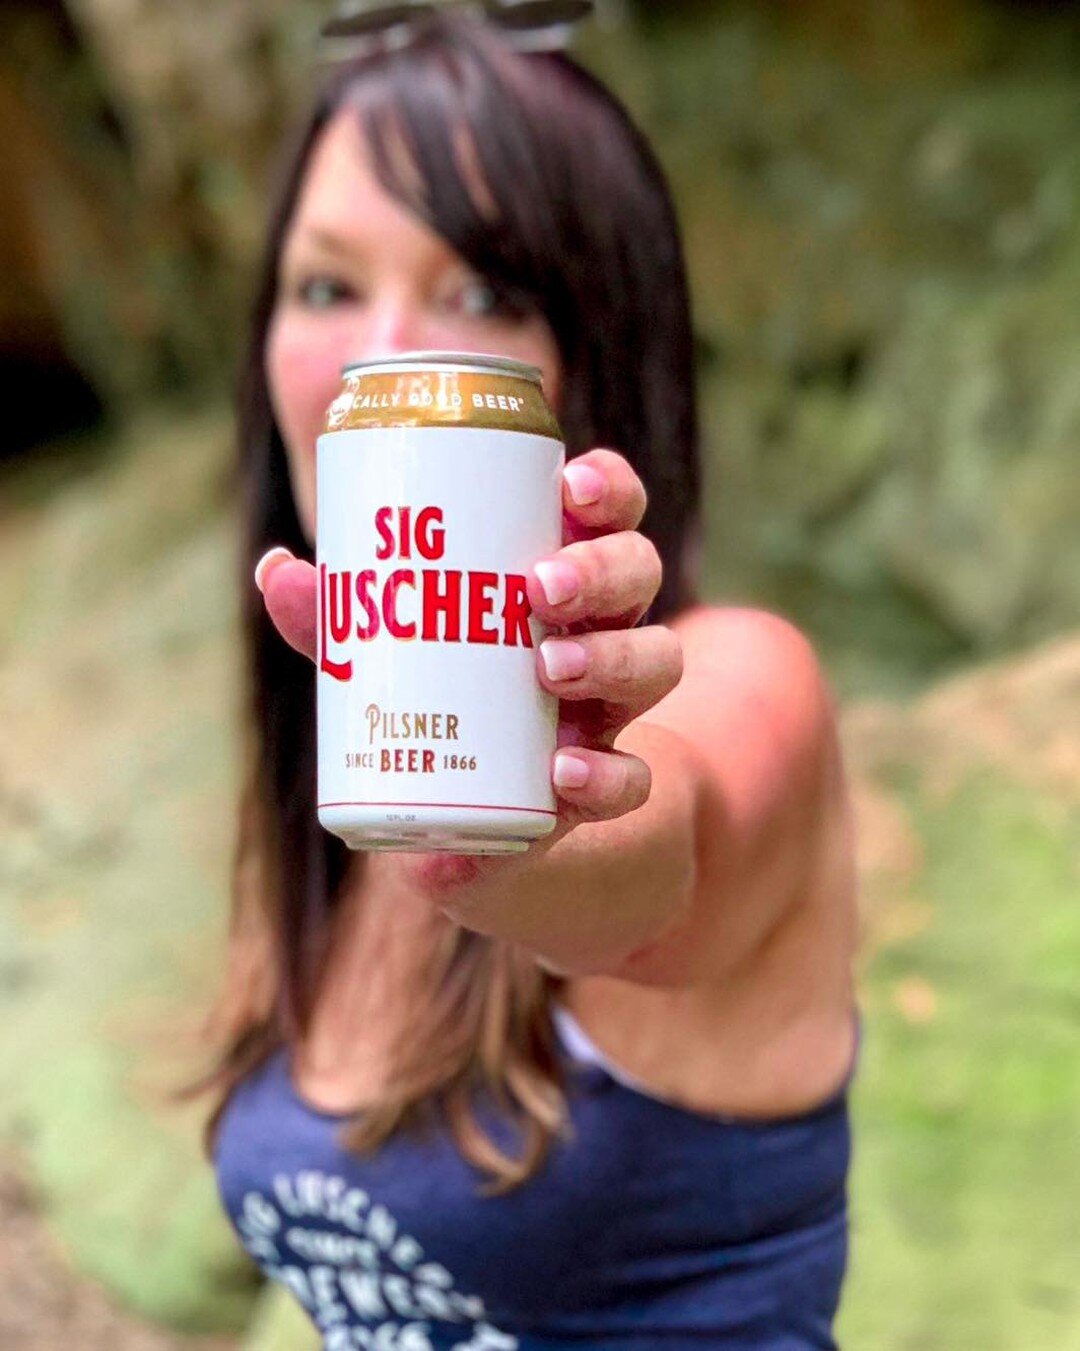 Sig Luscher is your mowing the grass beer🍺, football game beer 🏈, hanging out with your friends beer🍻....

The hiking the beautiful Kentucky trails beer! 🧗&zwj;♀️

Beer that taste like, well....beer!
Sig Luscher 
Historically Good Beer since 1866